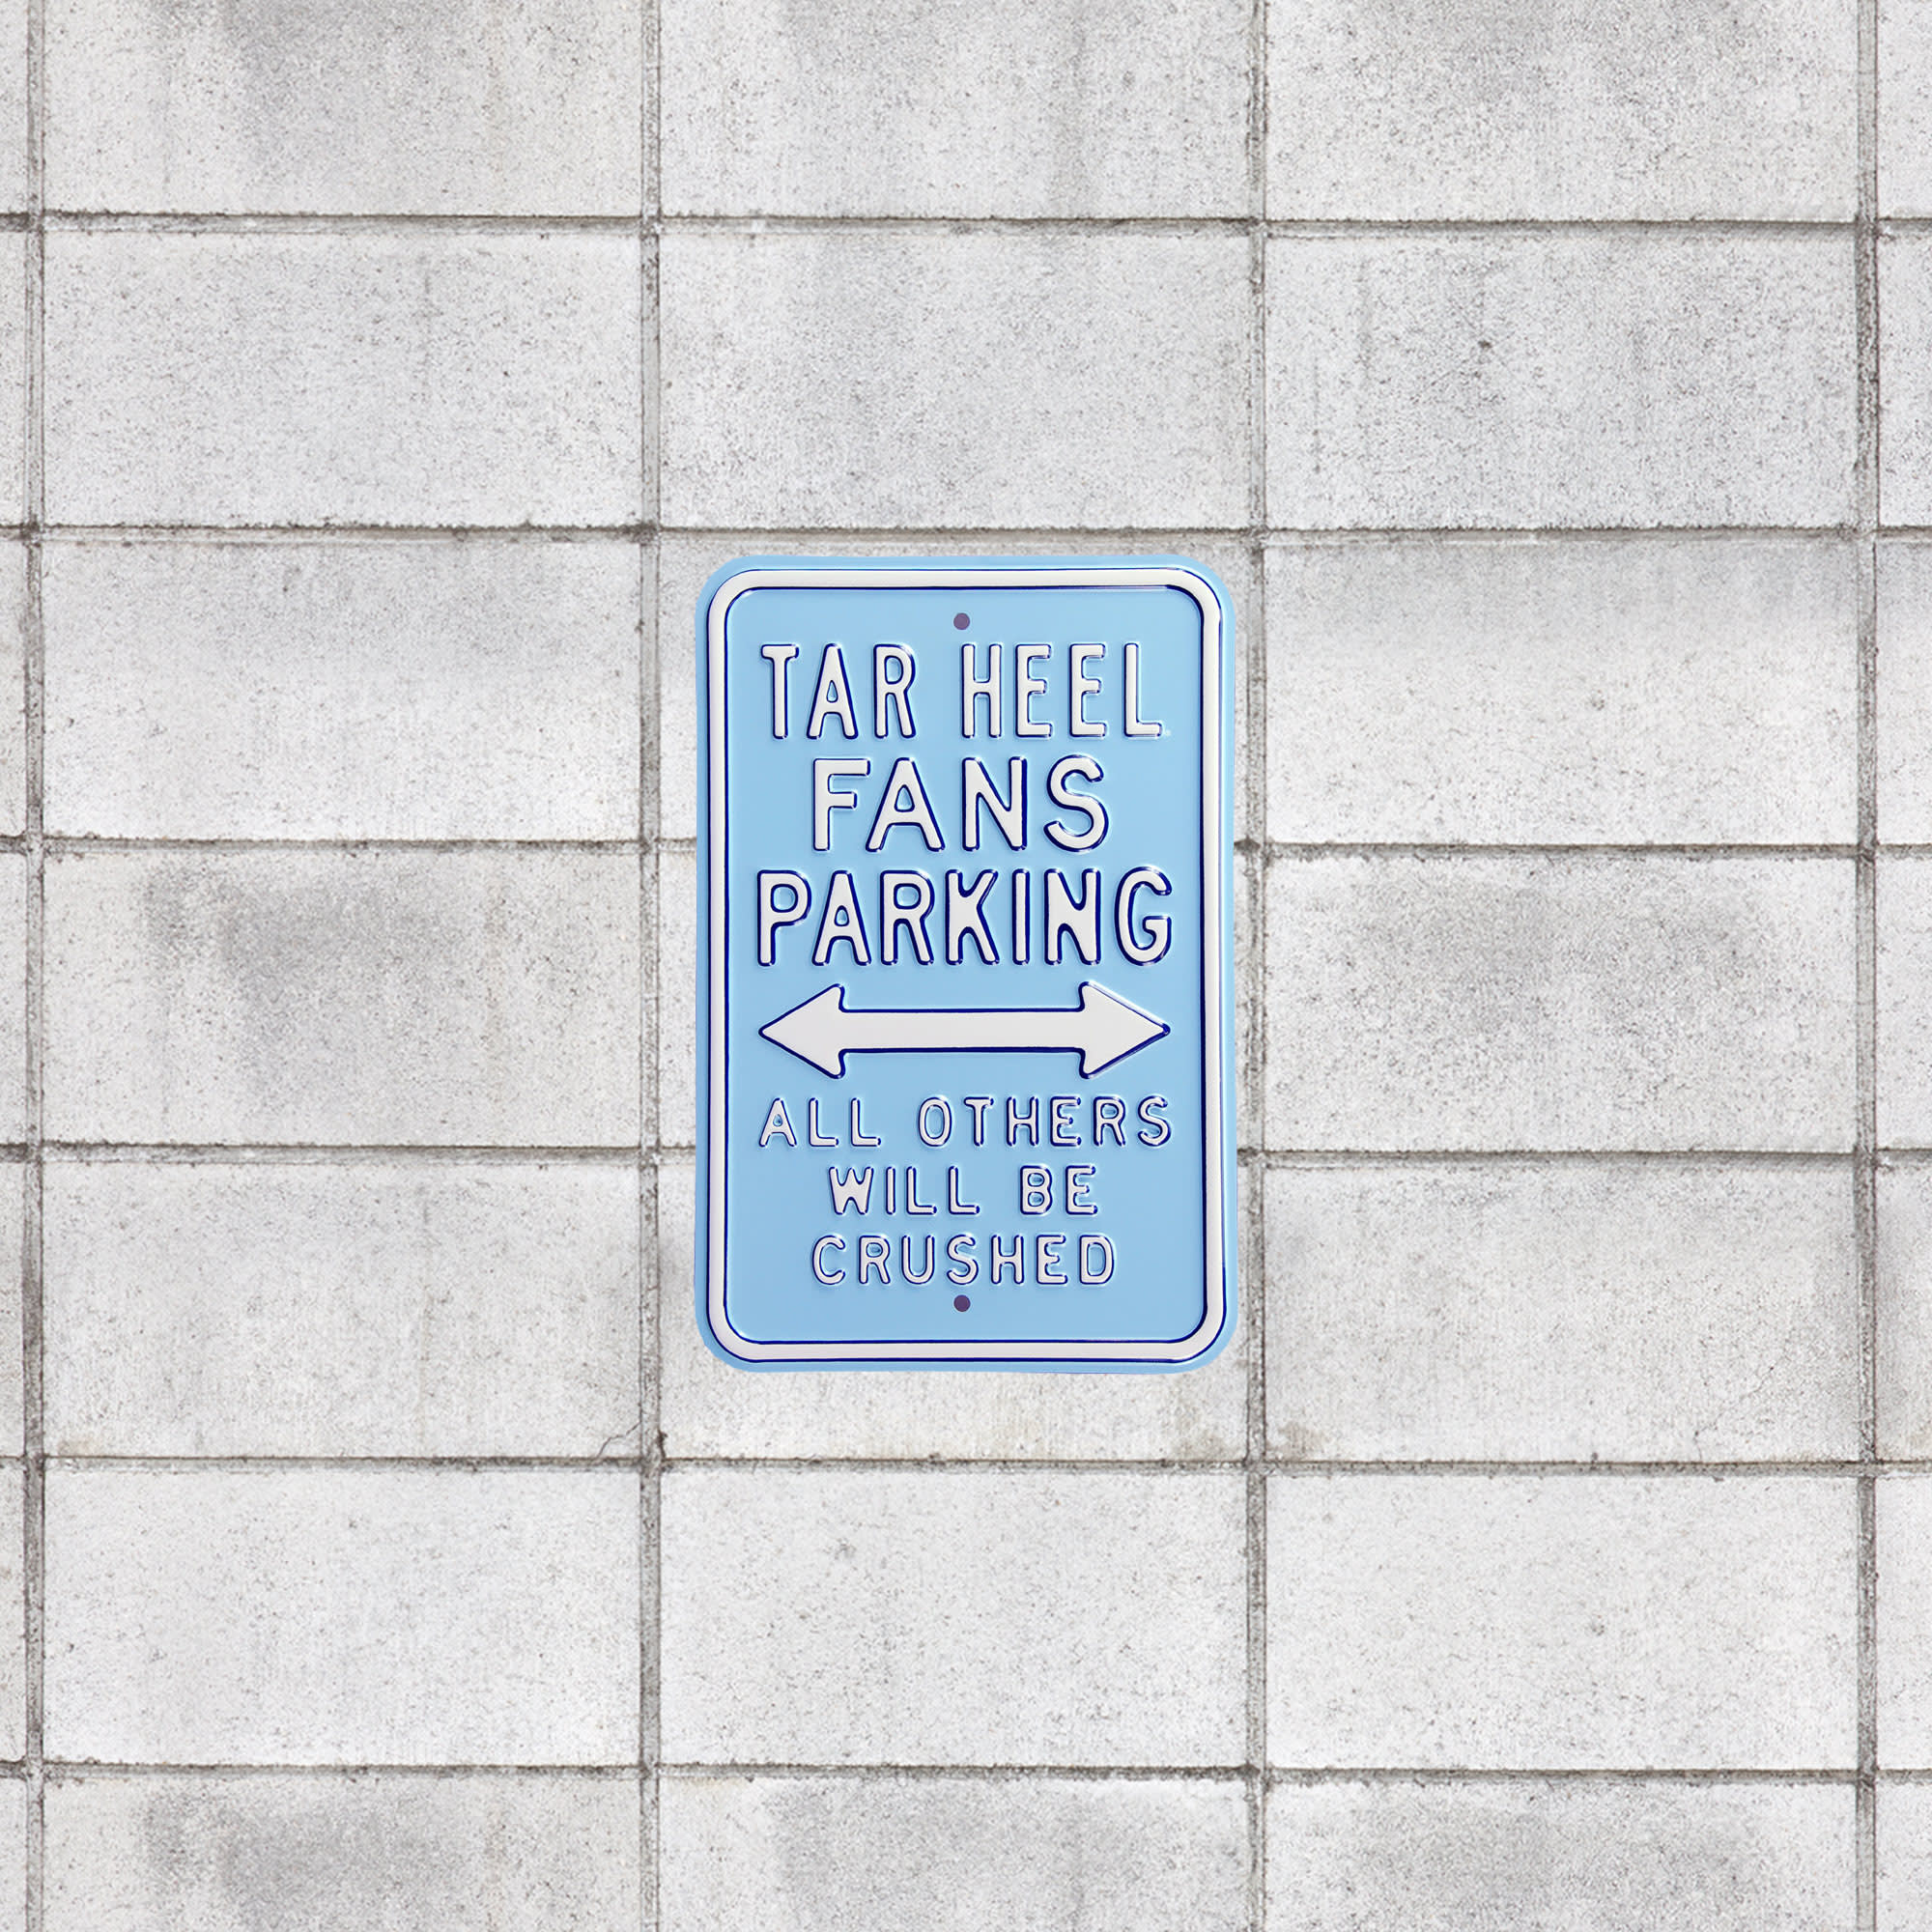 North Carolina Tar Heels: Crushed Parking - Officially Licensed Metal Street Sign 18.0"W x 12.0"H by Fathead | 100% Steel